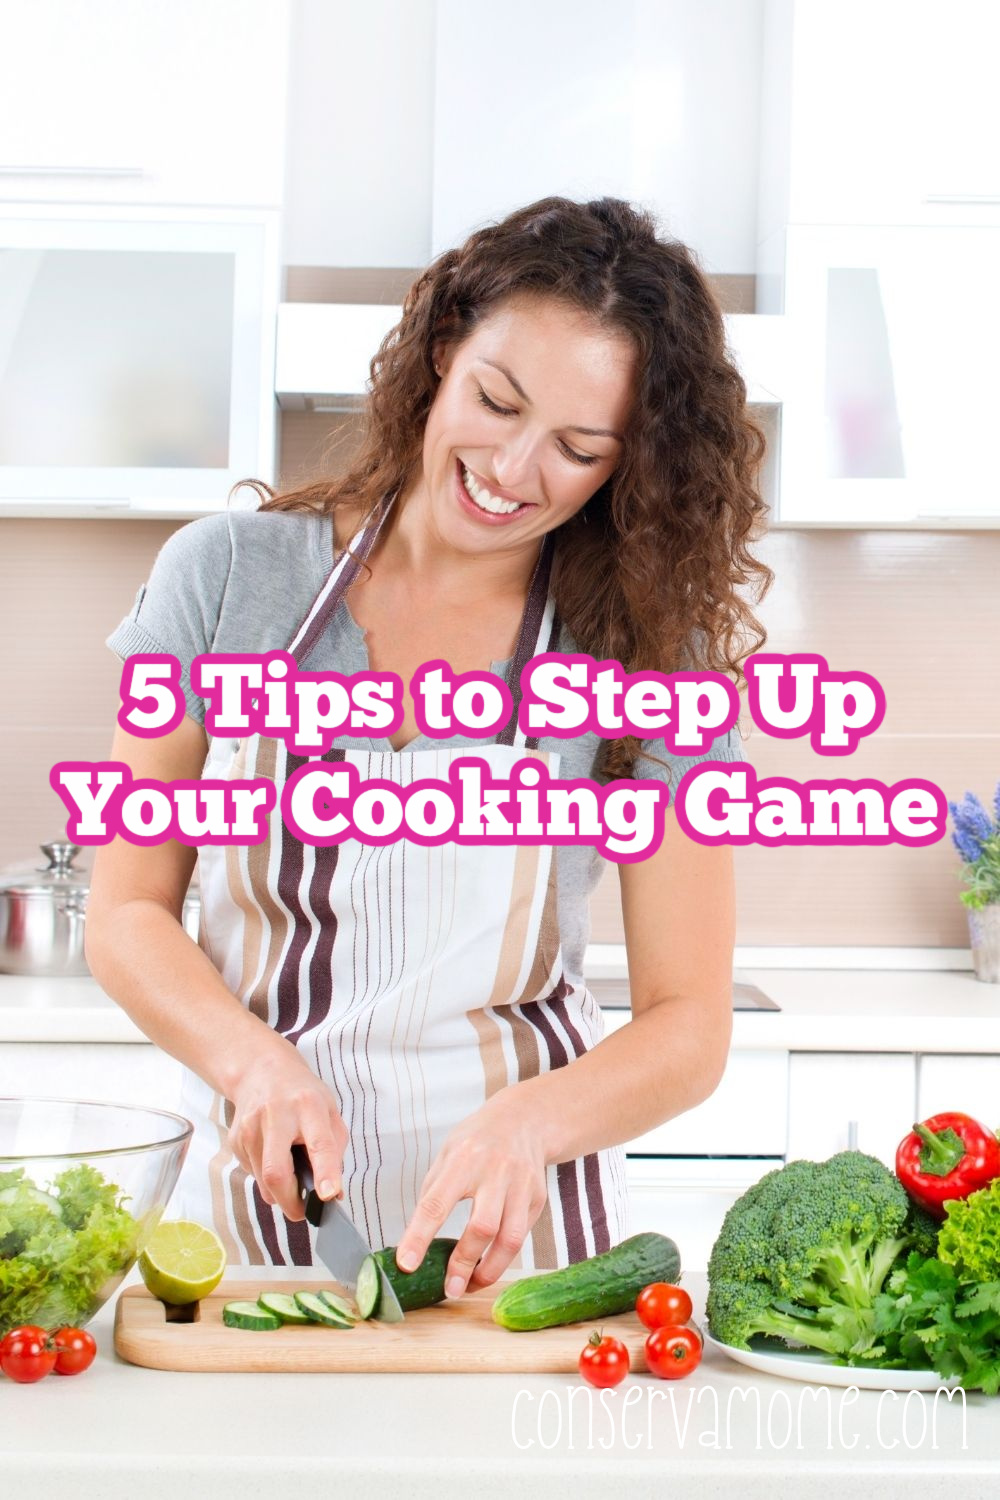 5 Tips to Step Up Your Cooking Game